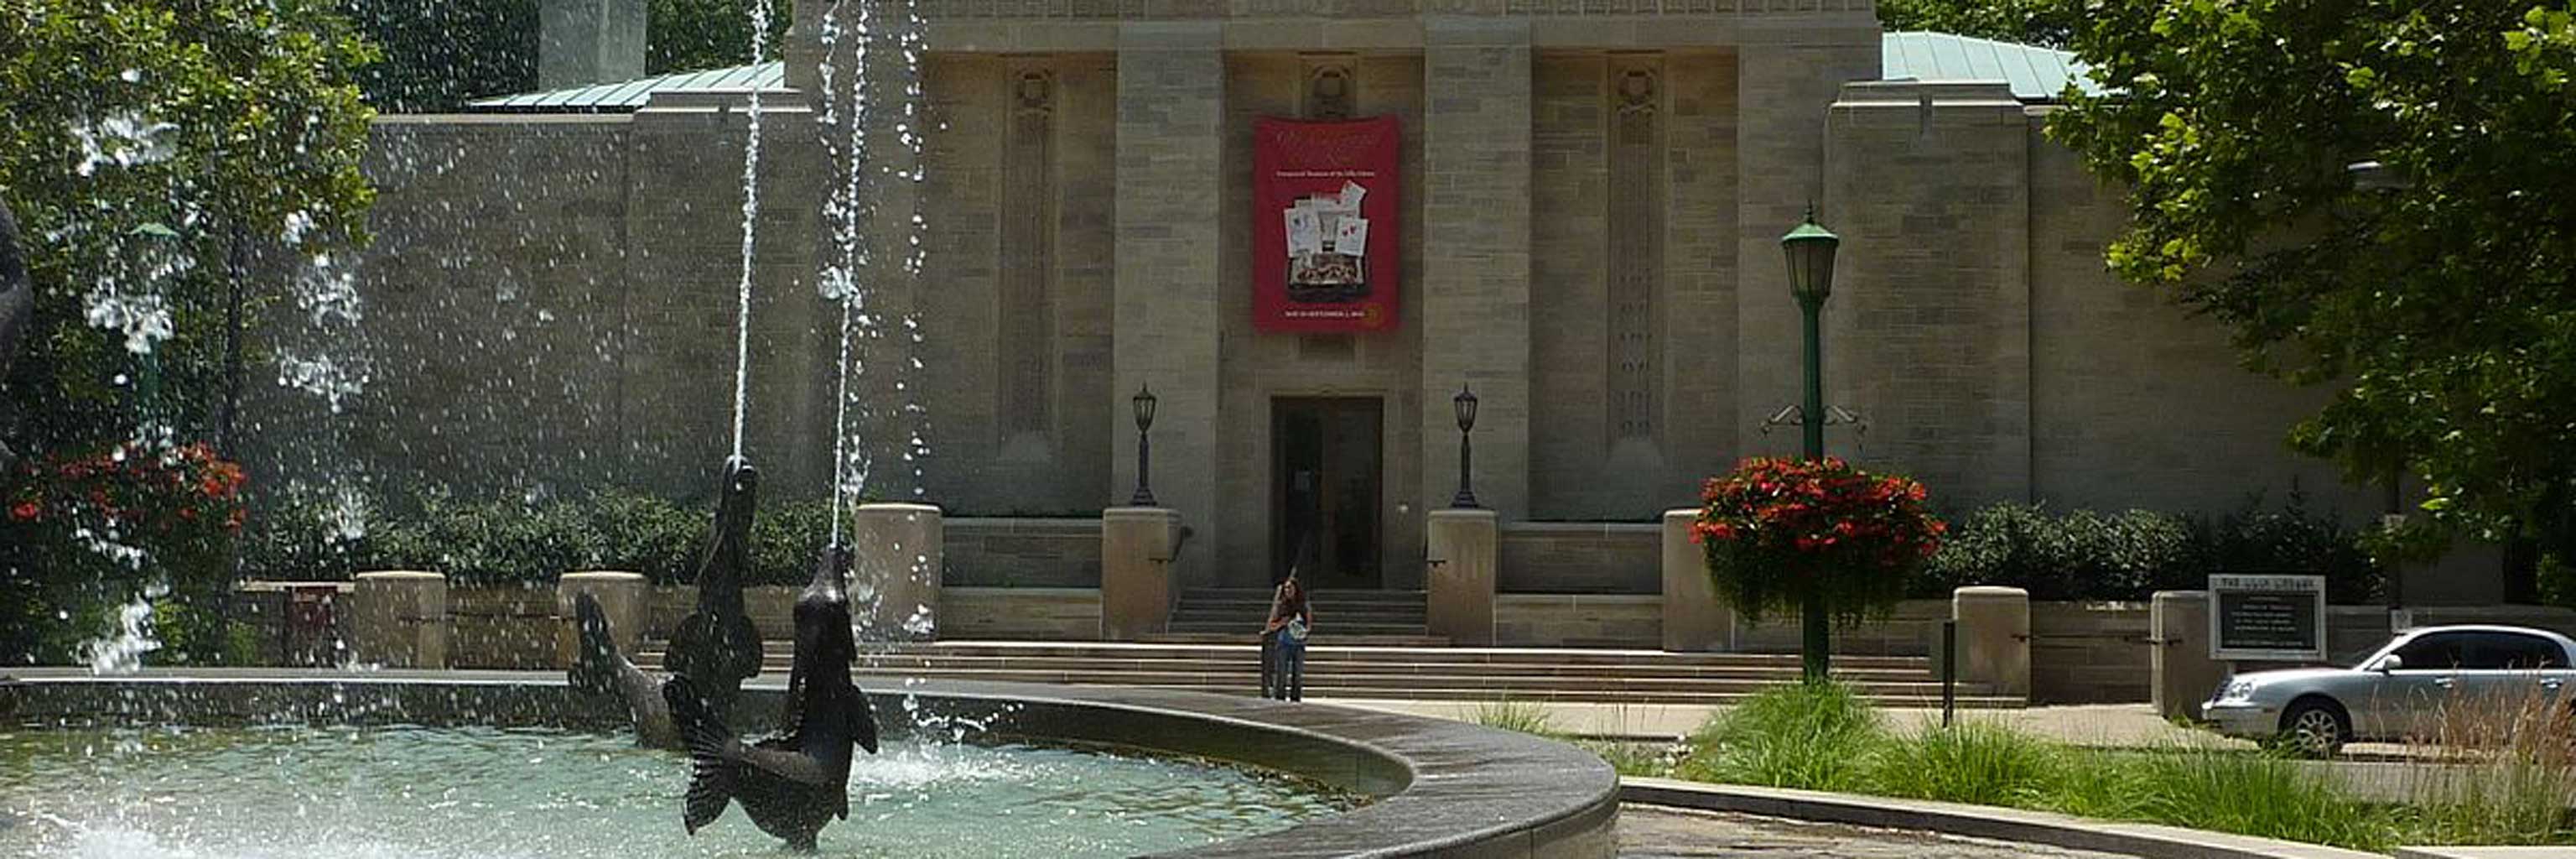 Fountain in front of the Lilly library